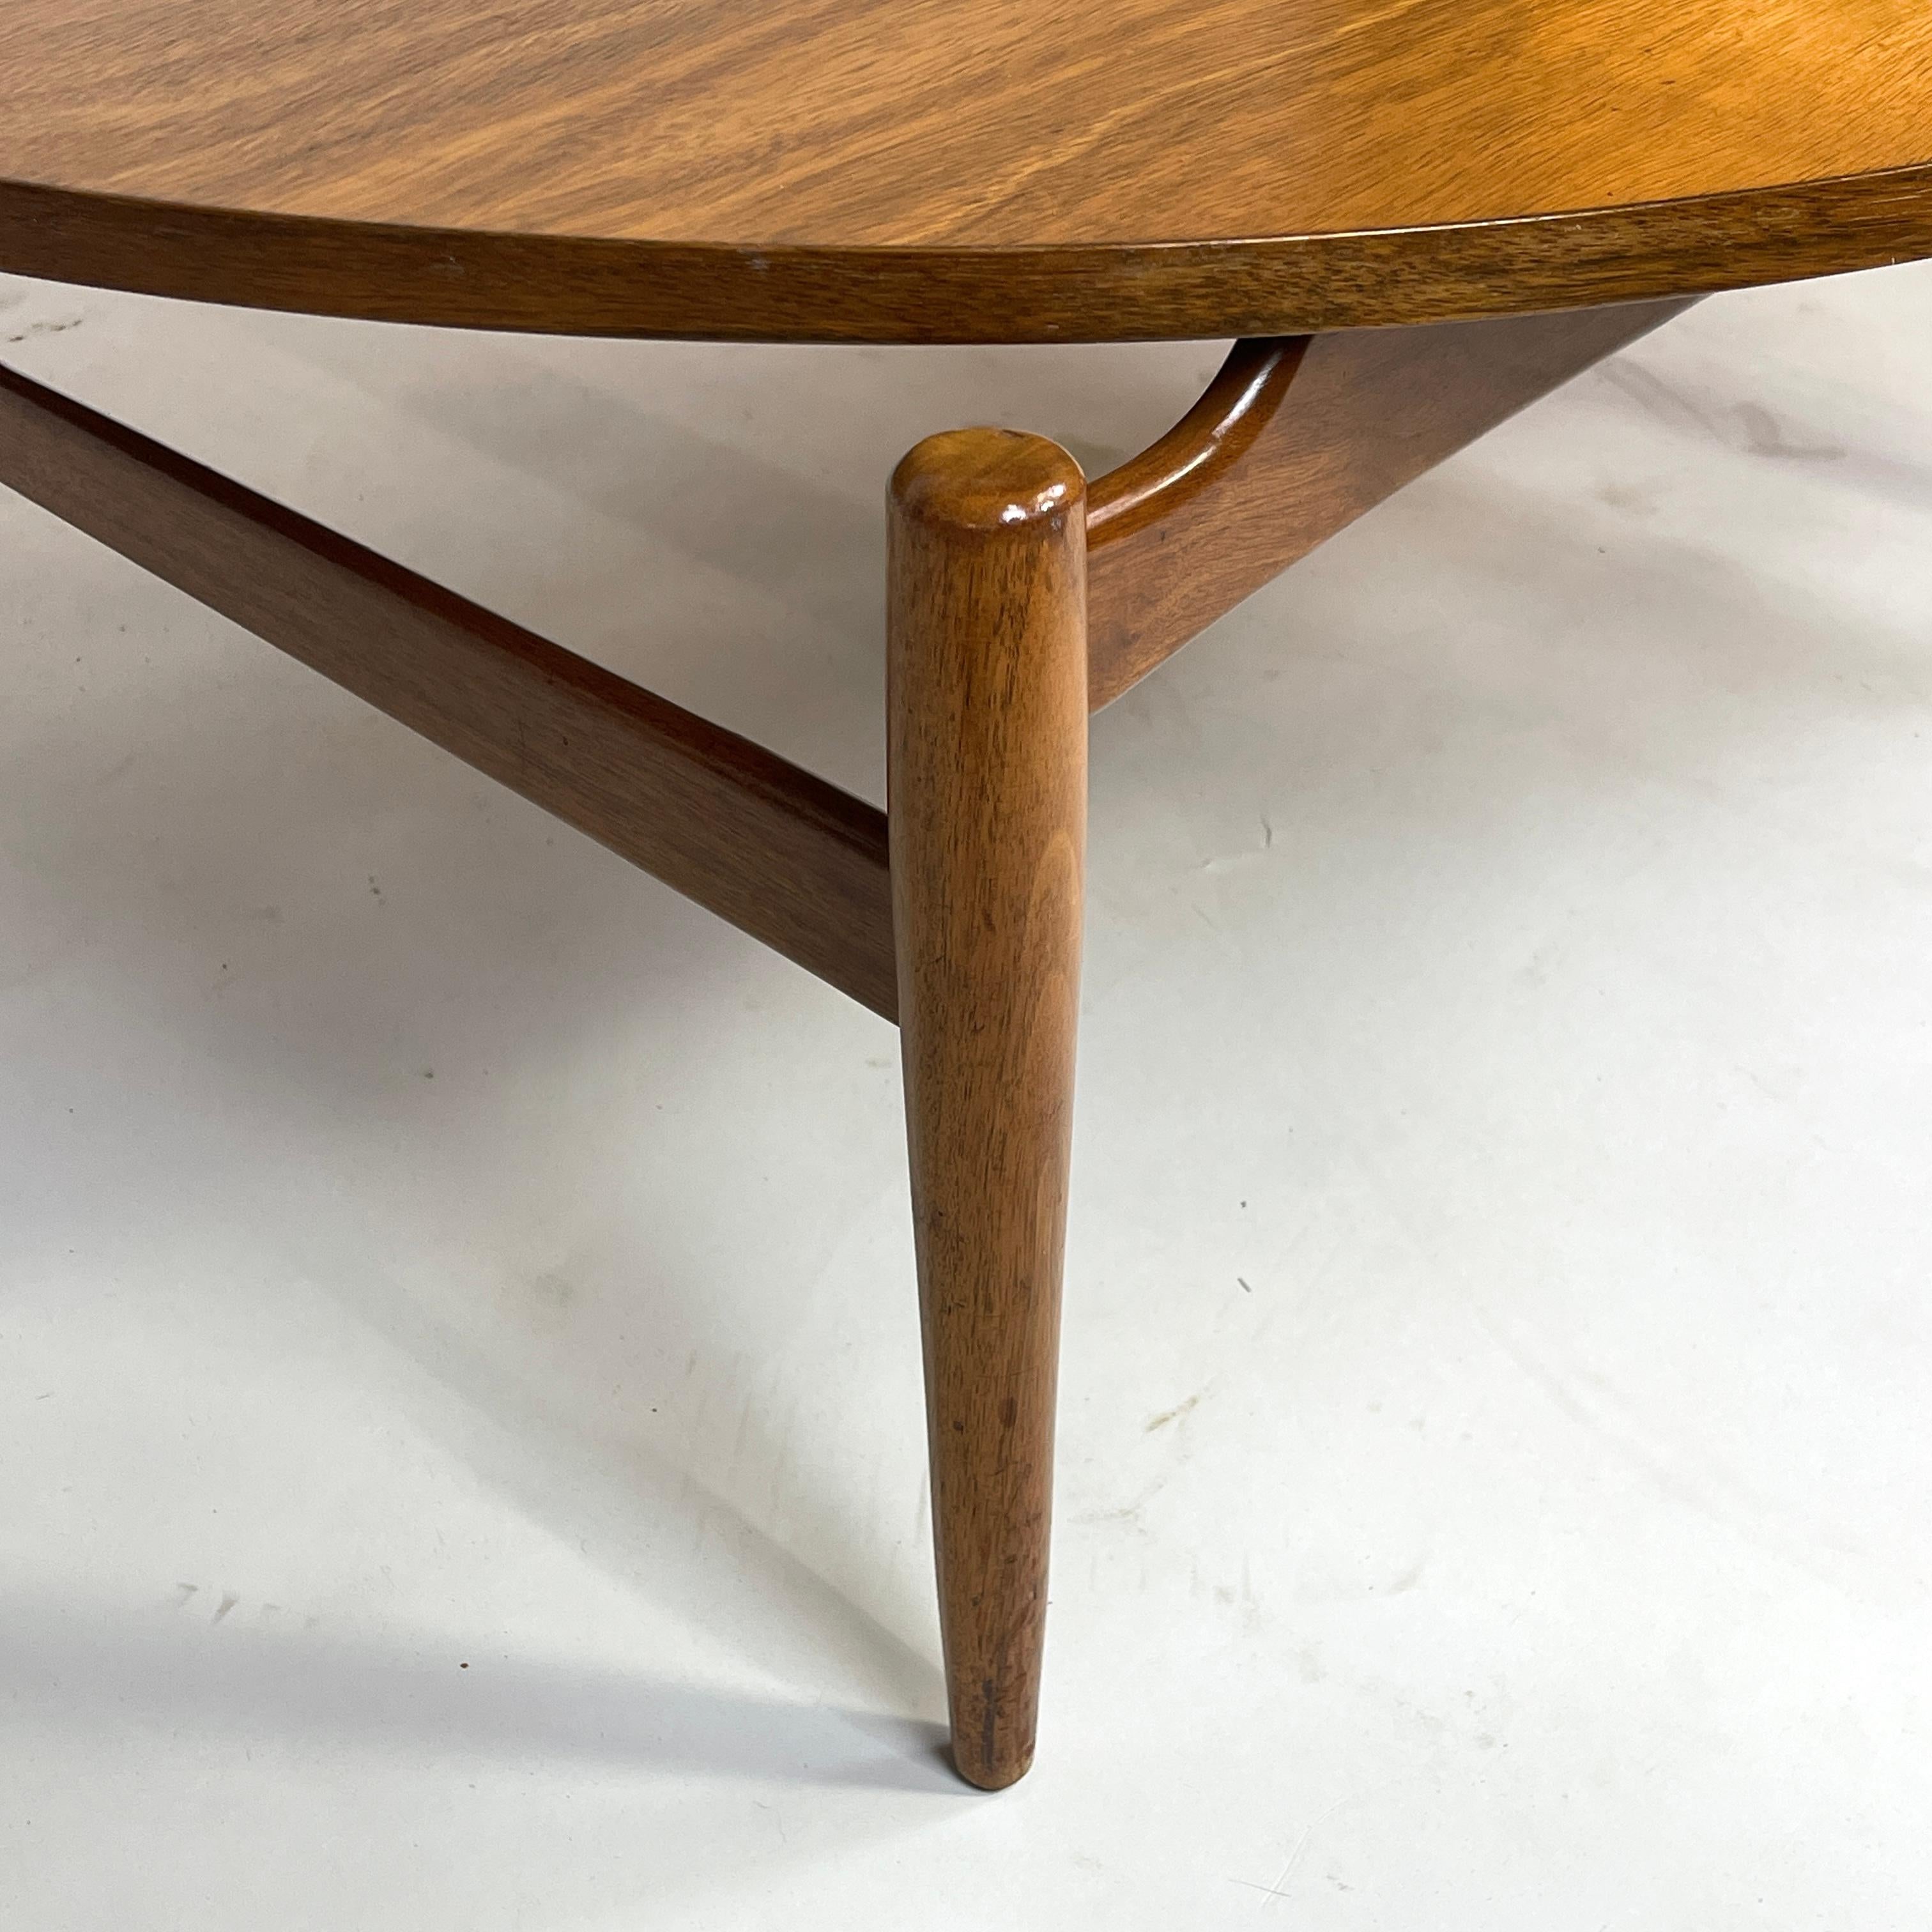 20th Century Jens Risom Floating Walnut and Tile Coffee Table For Sale